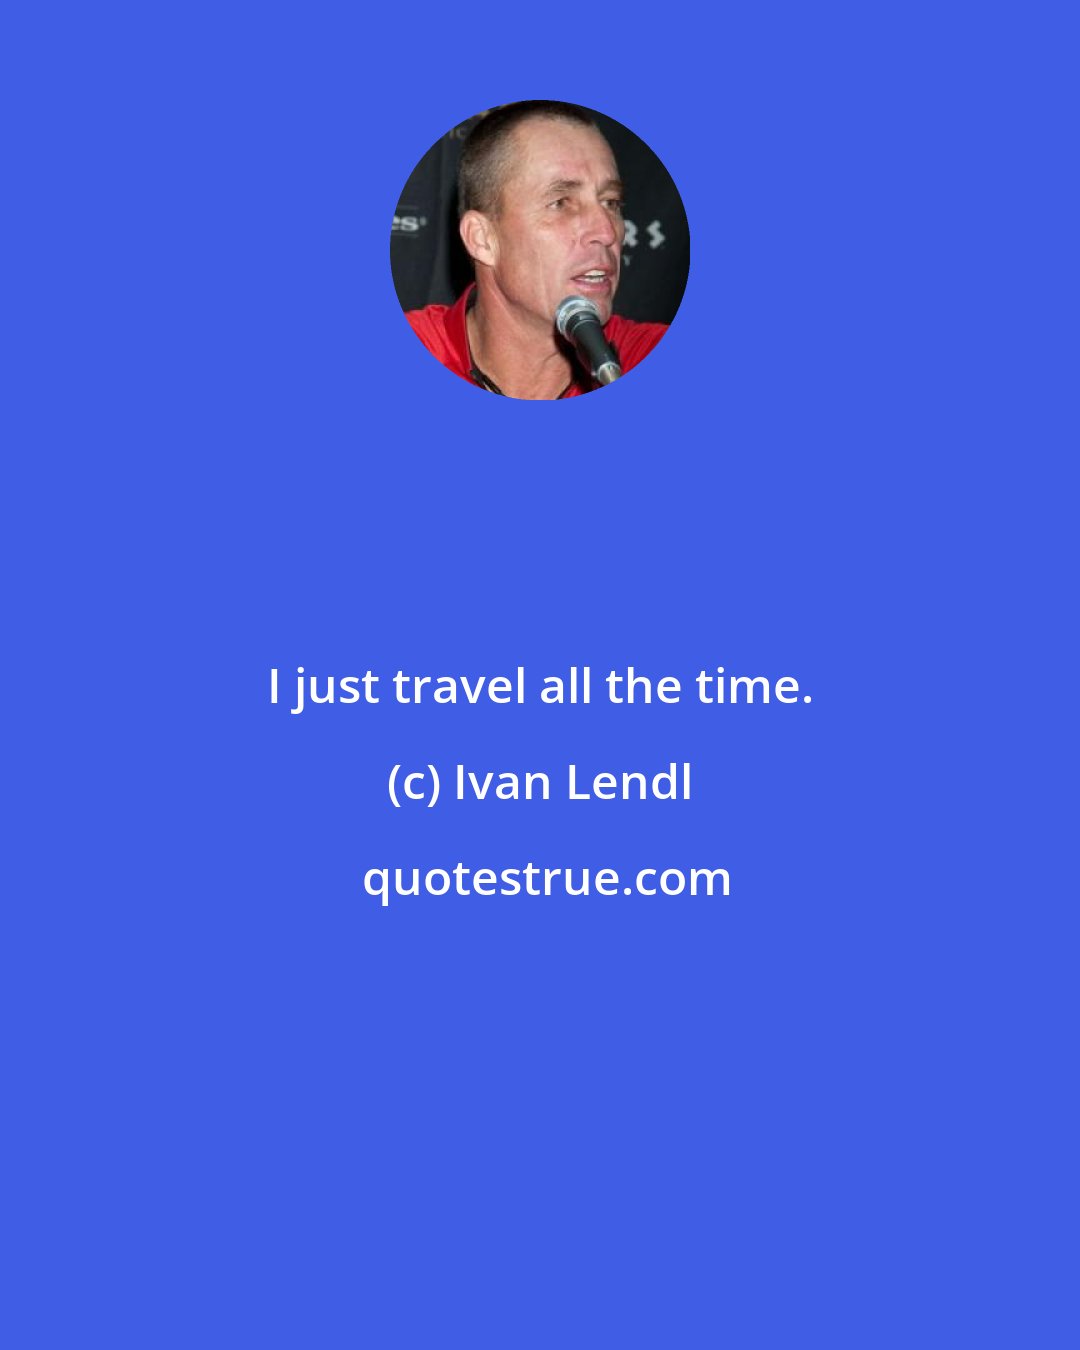 Ivan Lendl: I just travel all the time.